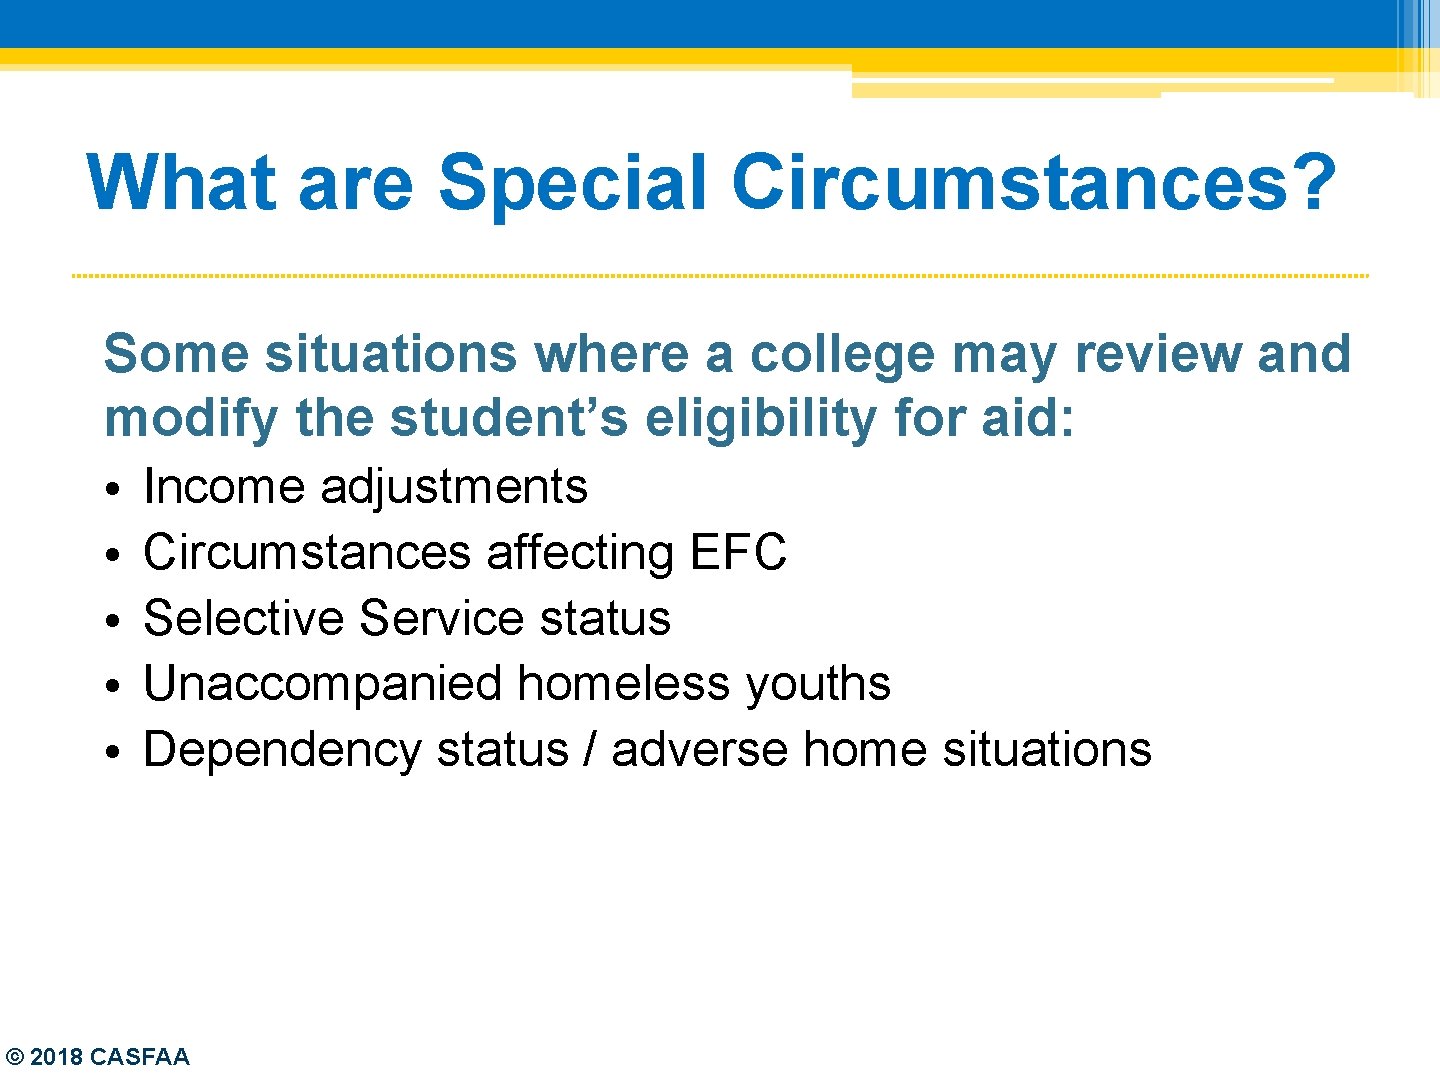 What are Special Circumstances? Some situations where a college may review and modify the